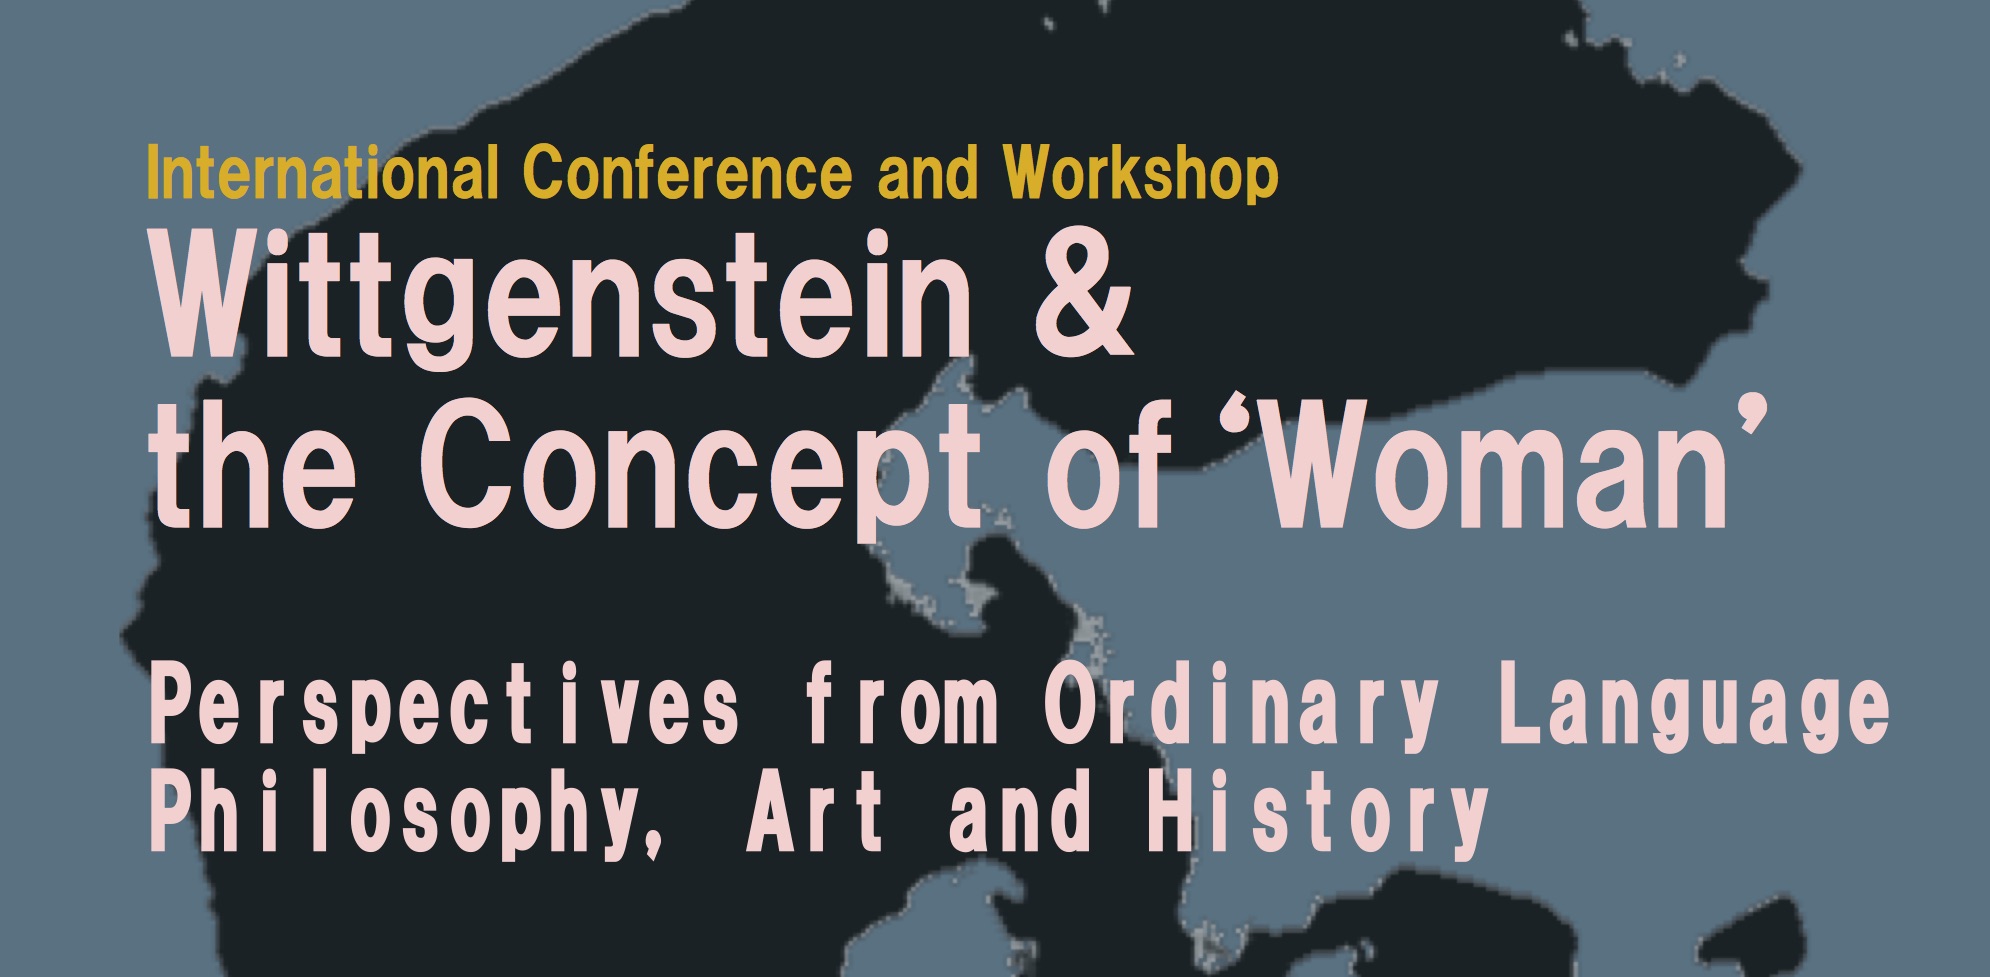 International Conference "Wittgenstein & Women: Perspectives from Ordinary Language Philosophy, Art and History"